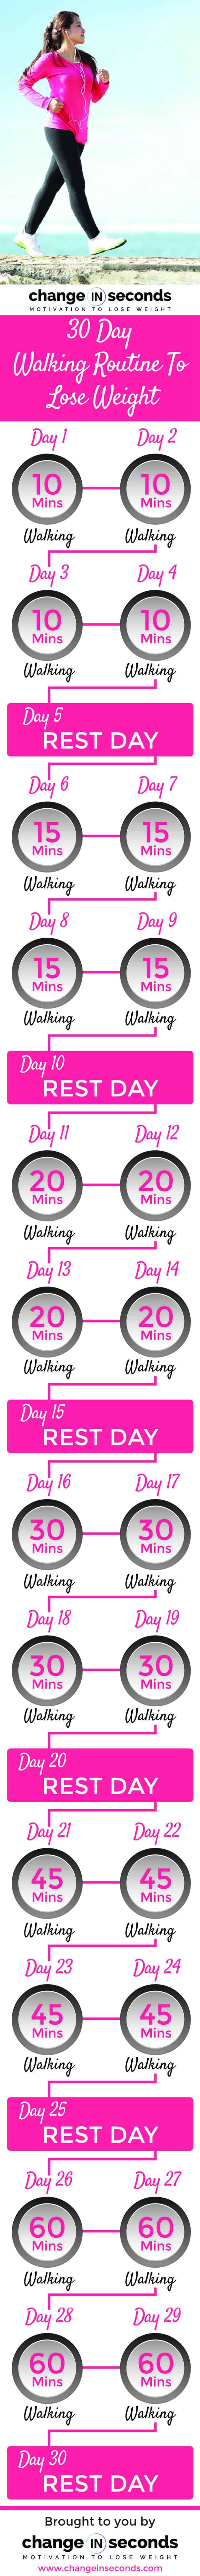 30 Day Walking Routine To Lose Weight